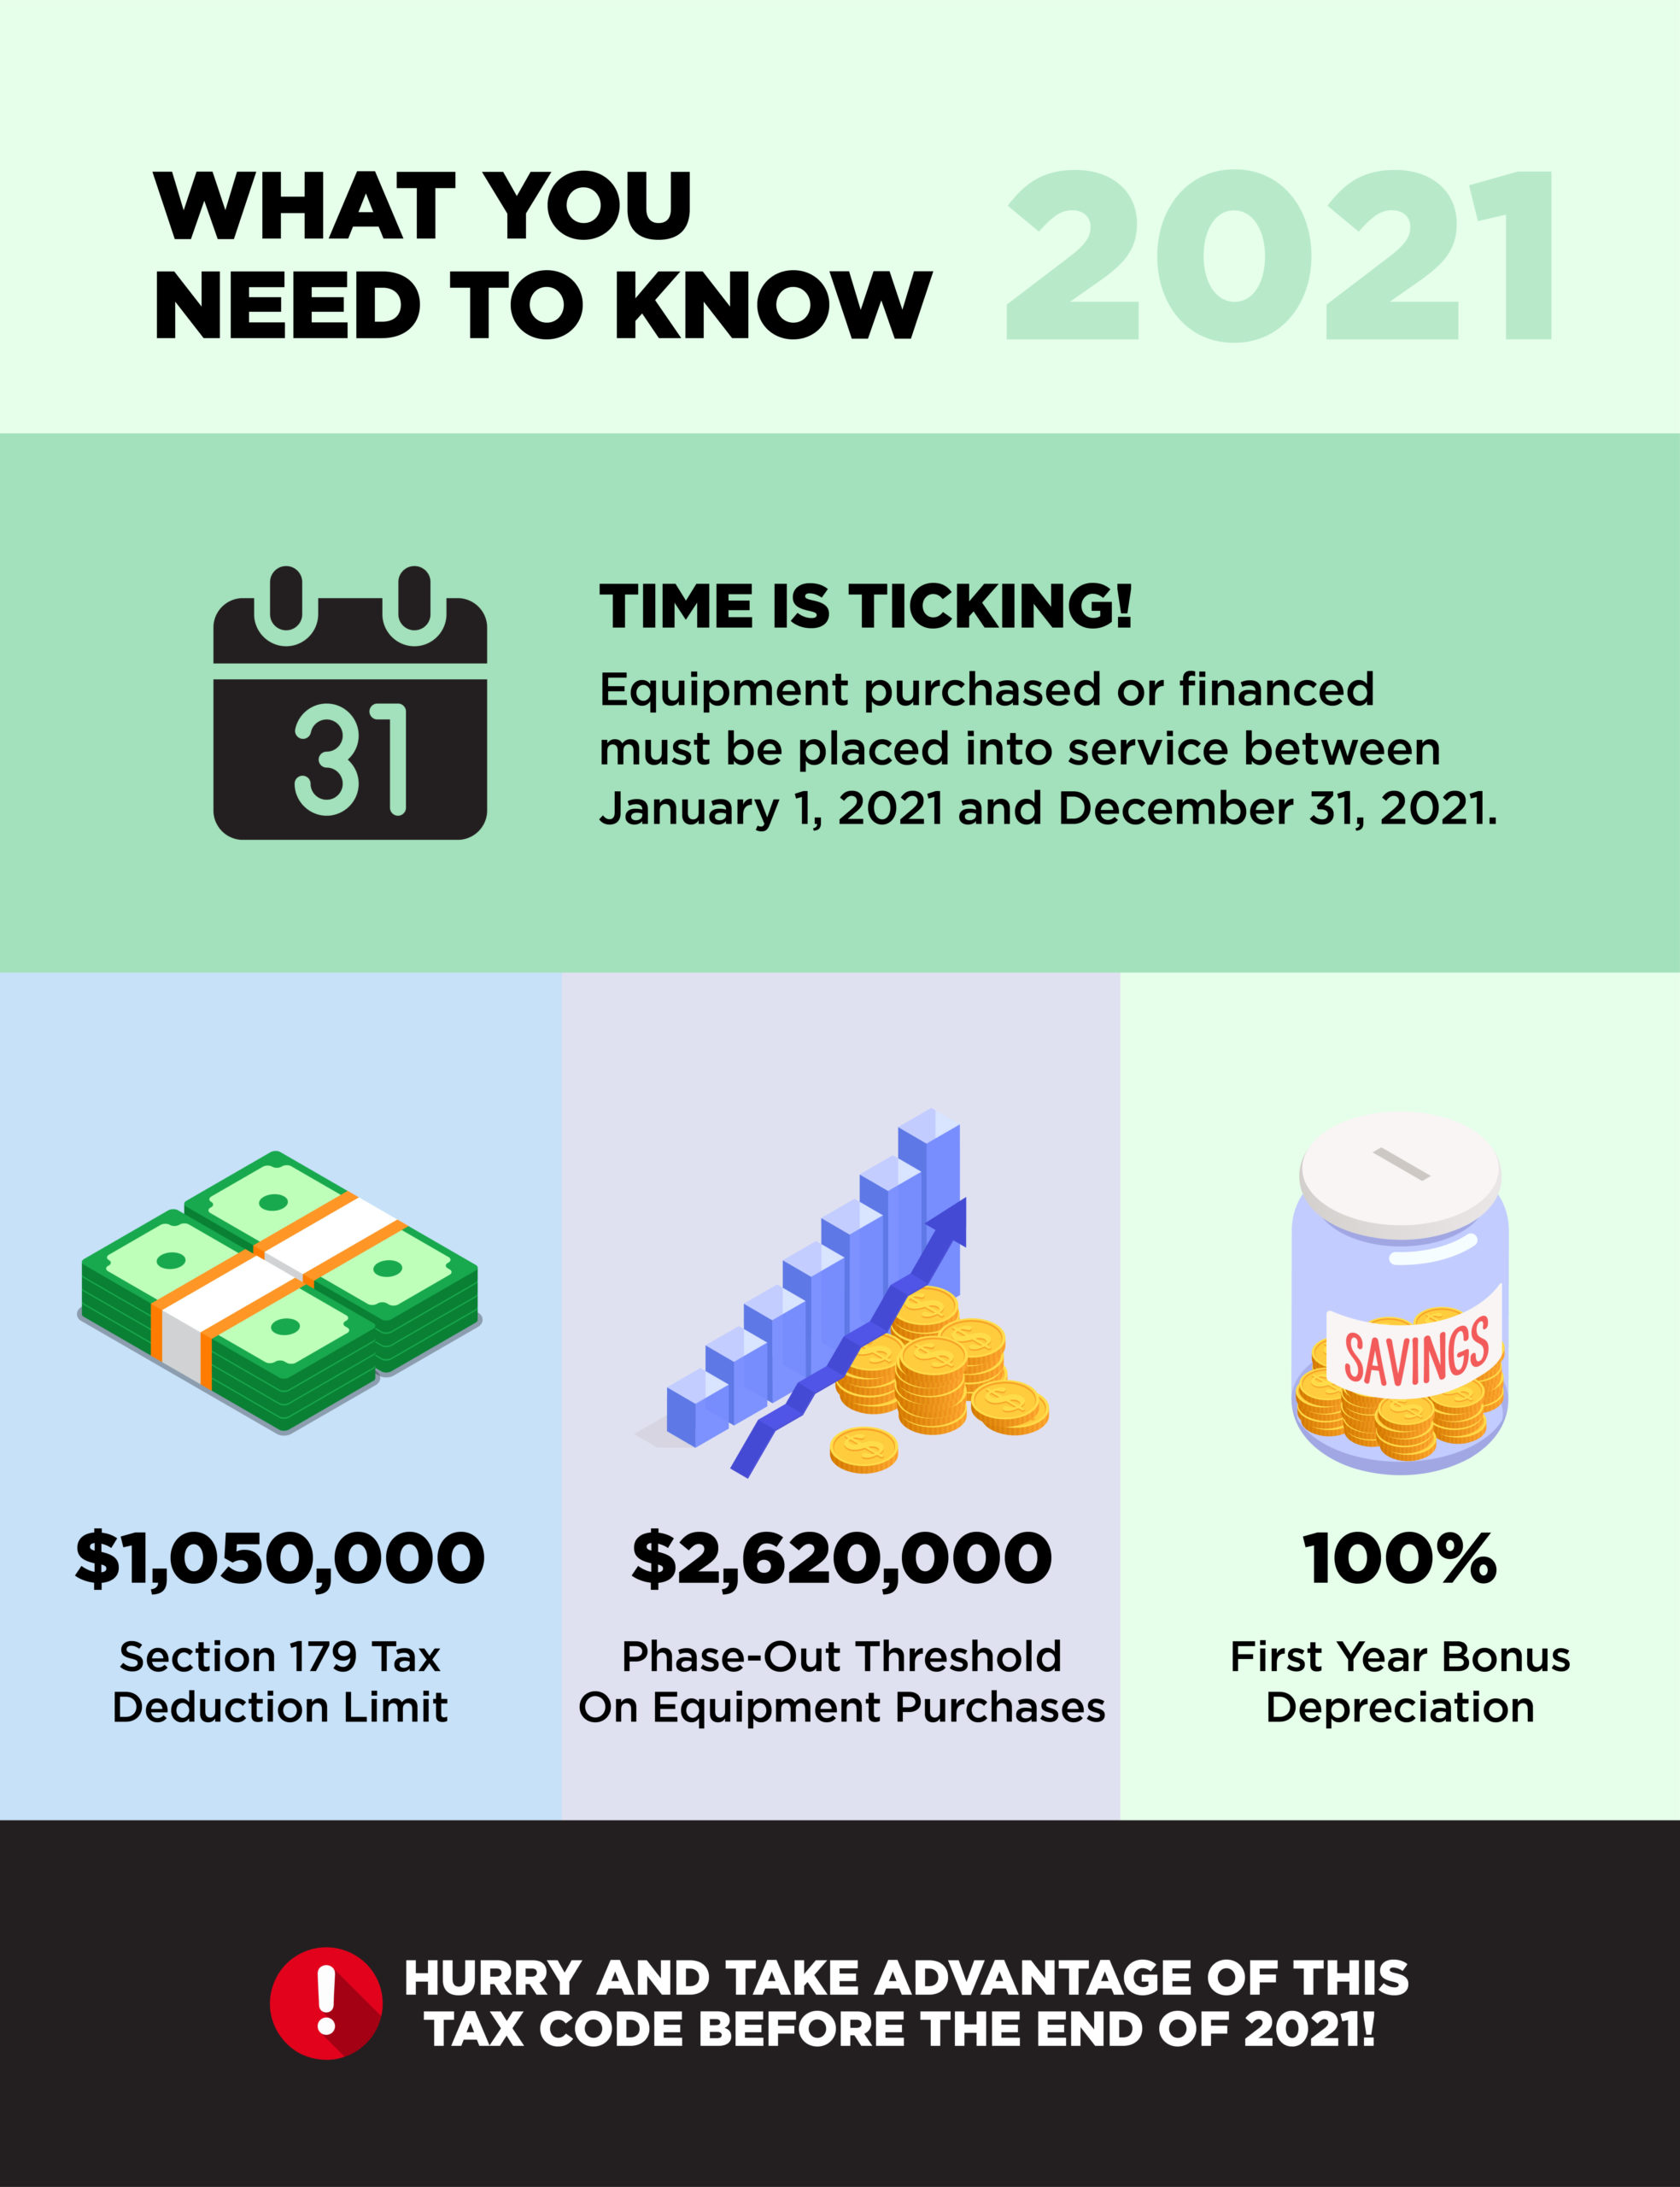 "Infographic shows information regarding Section 179, such as the deadline and deduction limit for the year 2021."